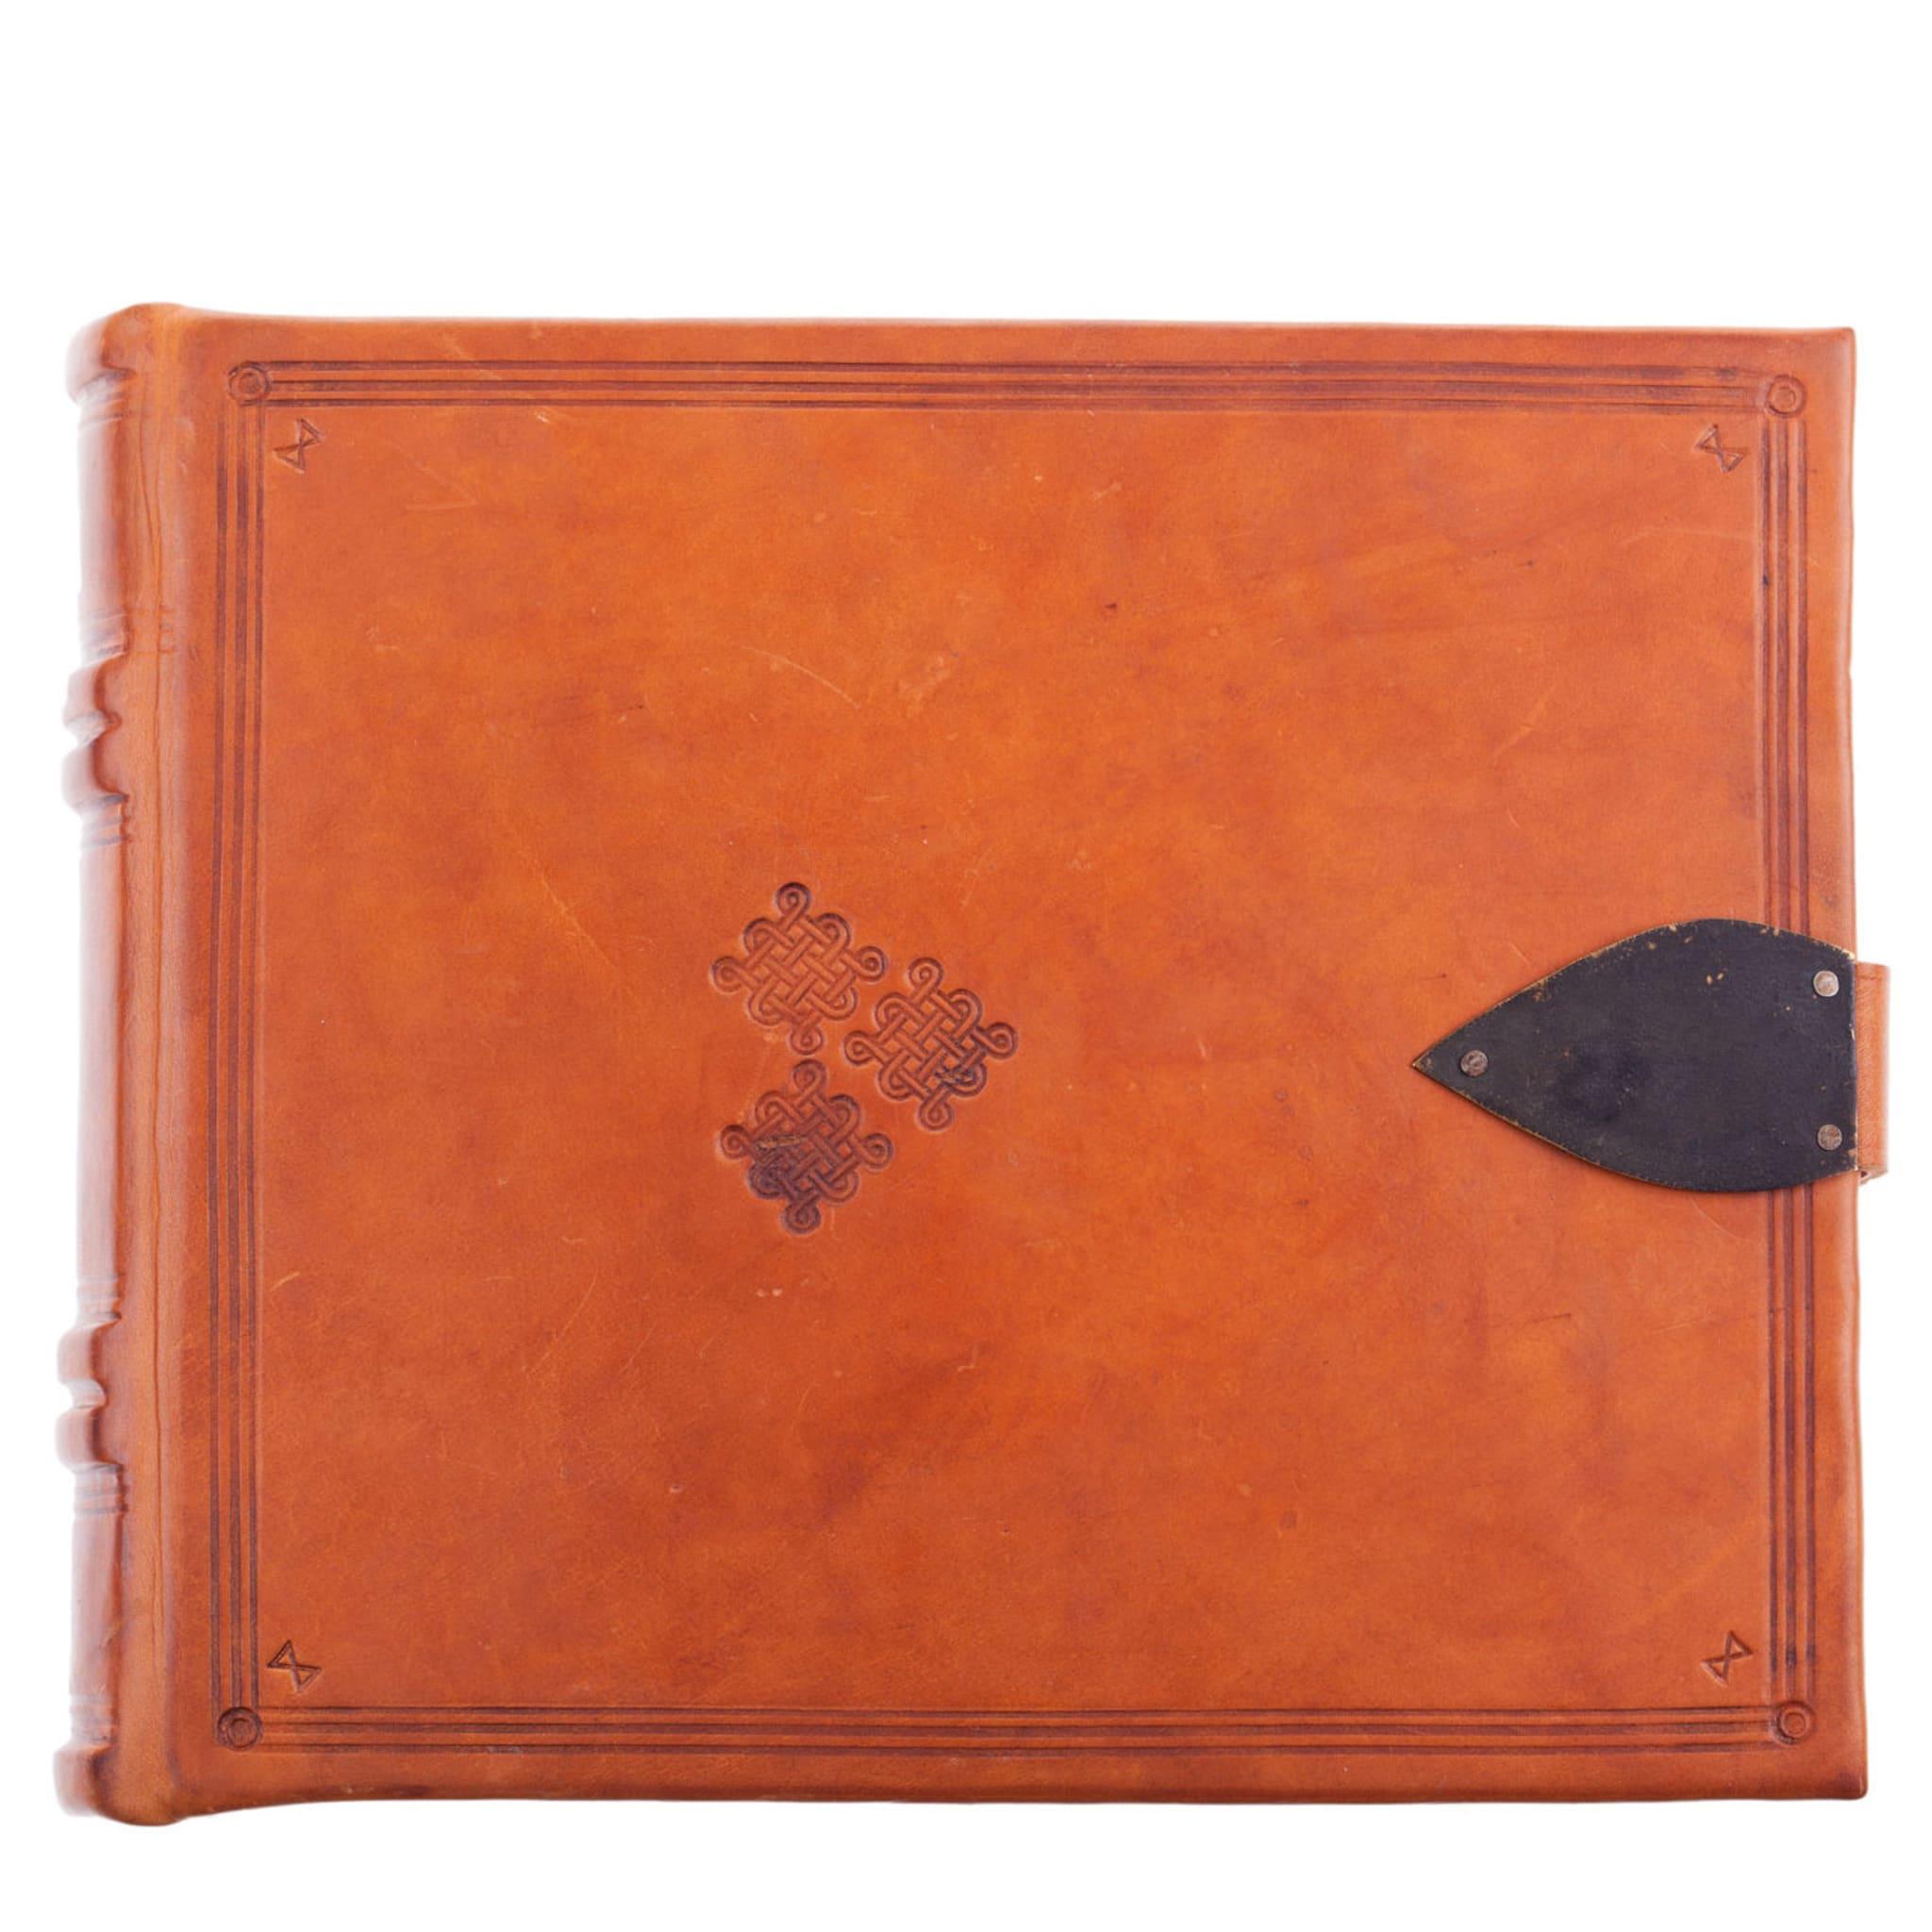 Monastico Landsape Leather Book In New Condition For Sale In Milan, IT